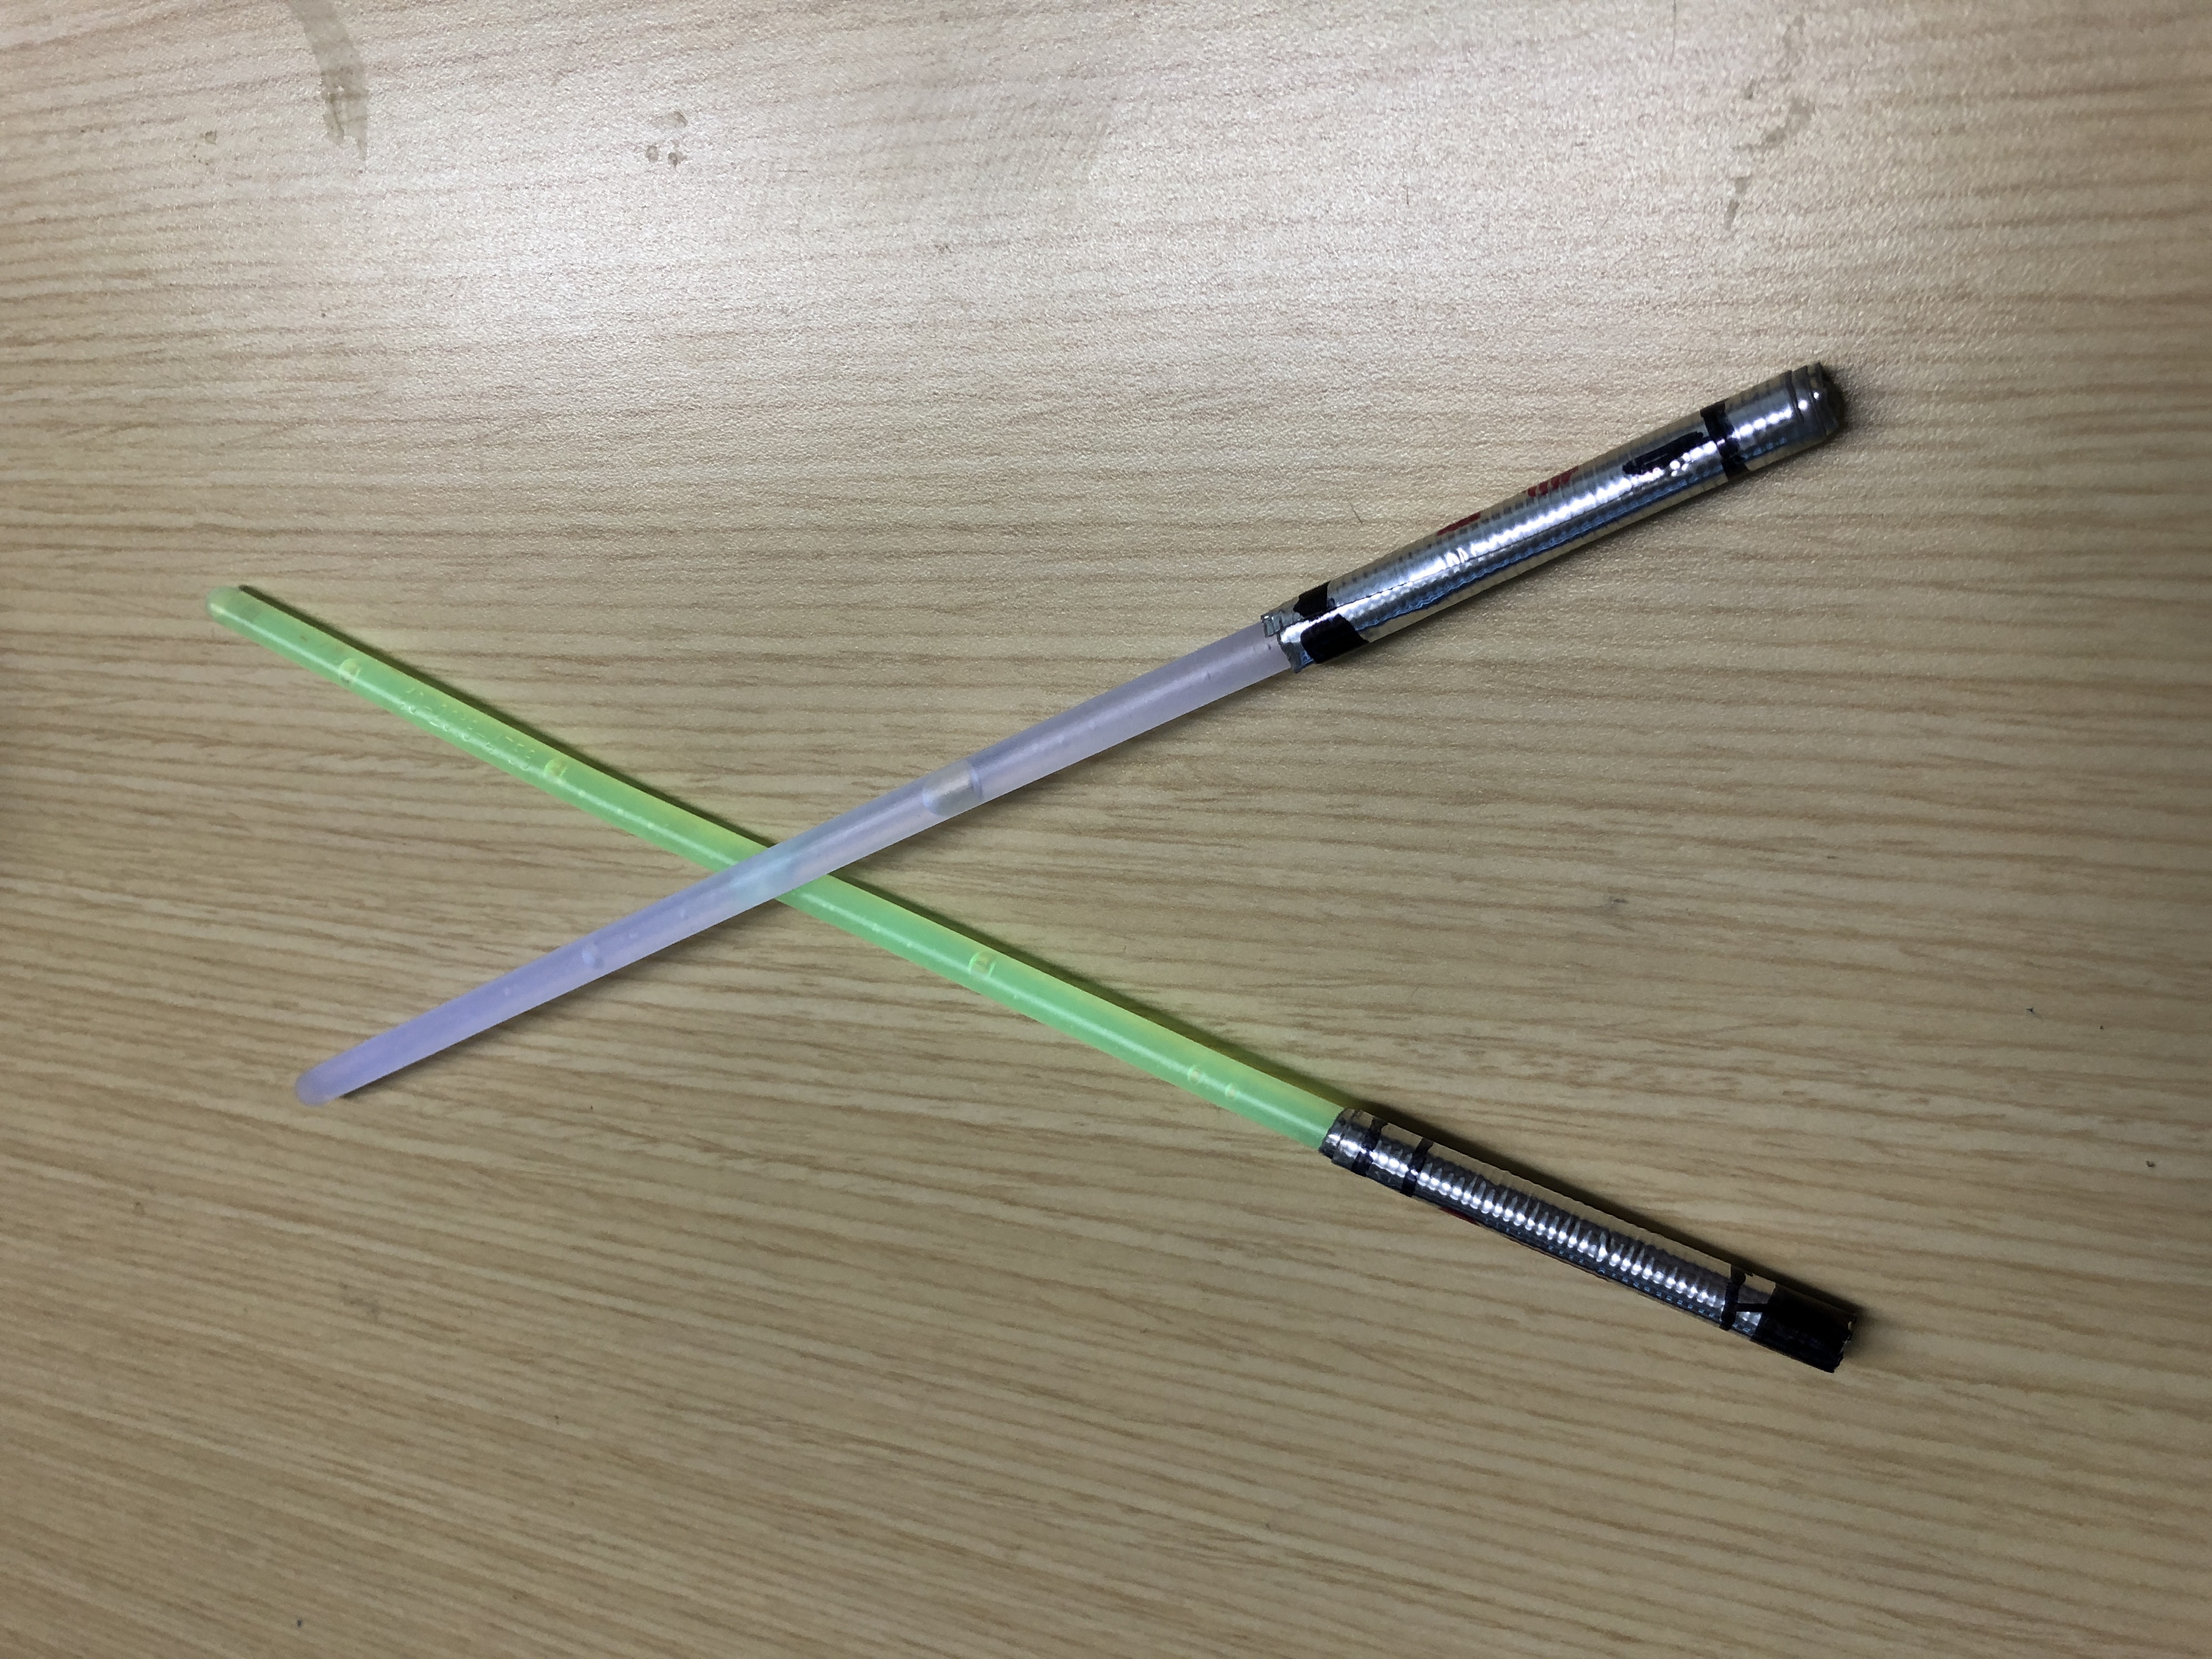 glow sticks with silver tape on the bottom mimicking light sabers